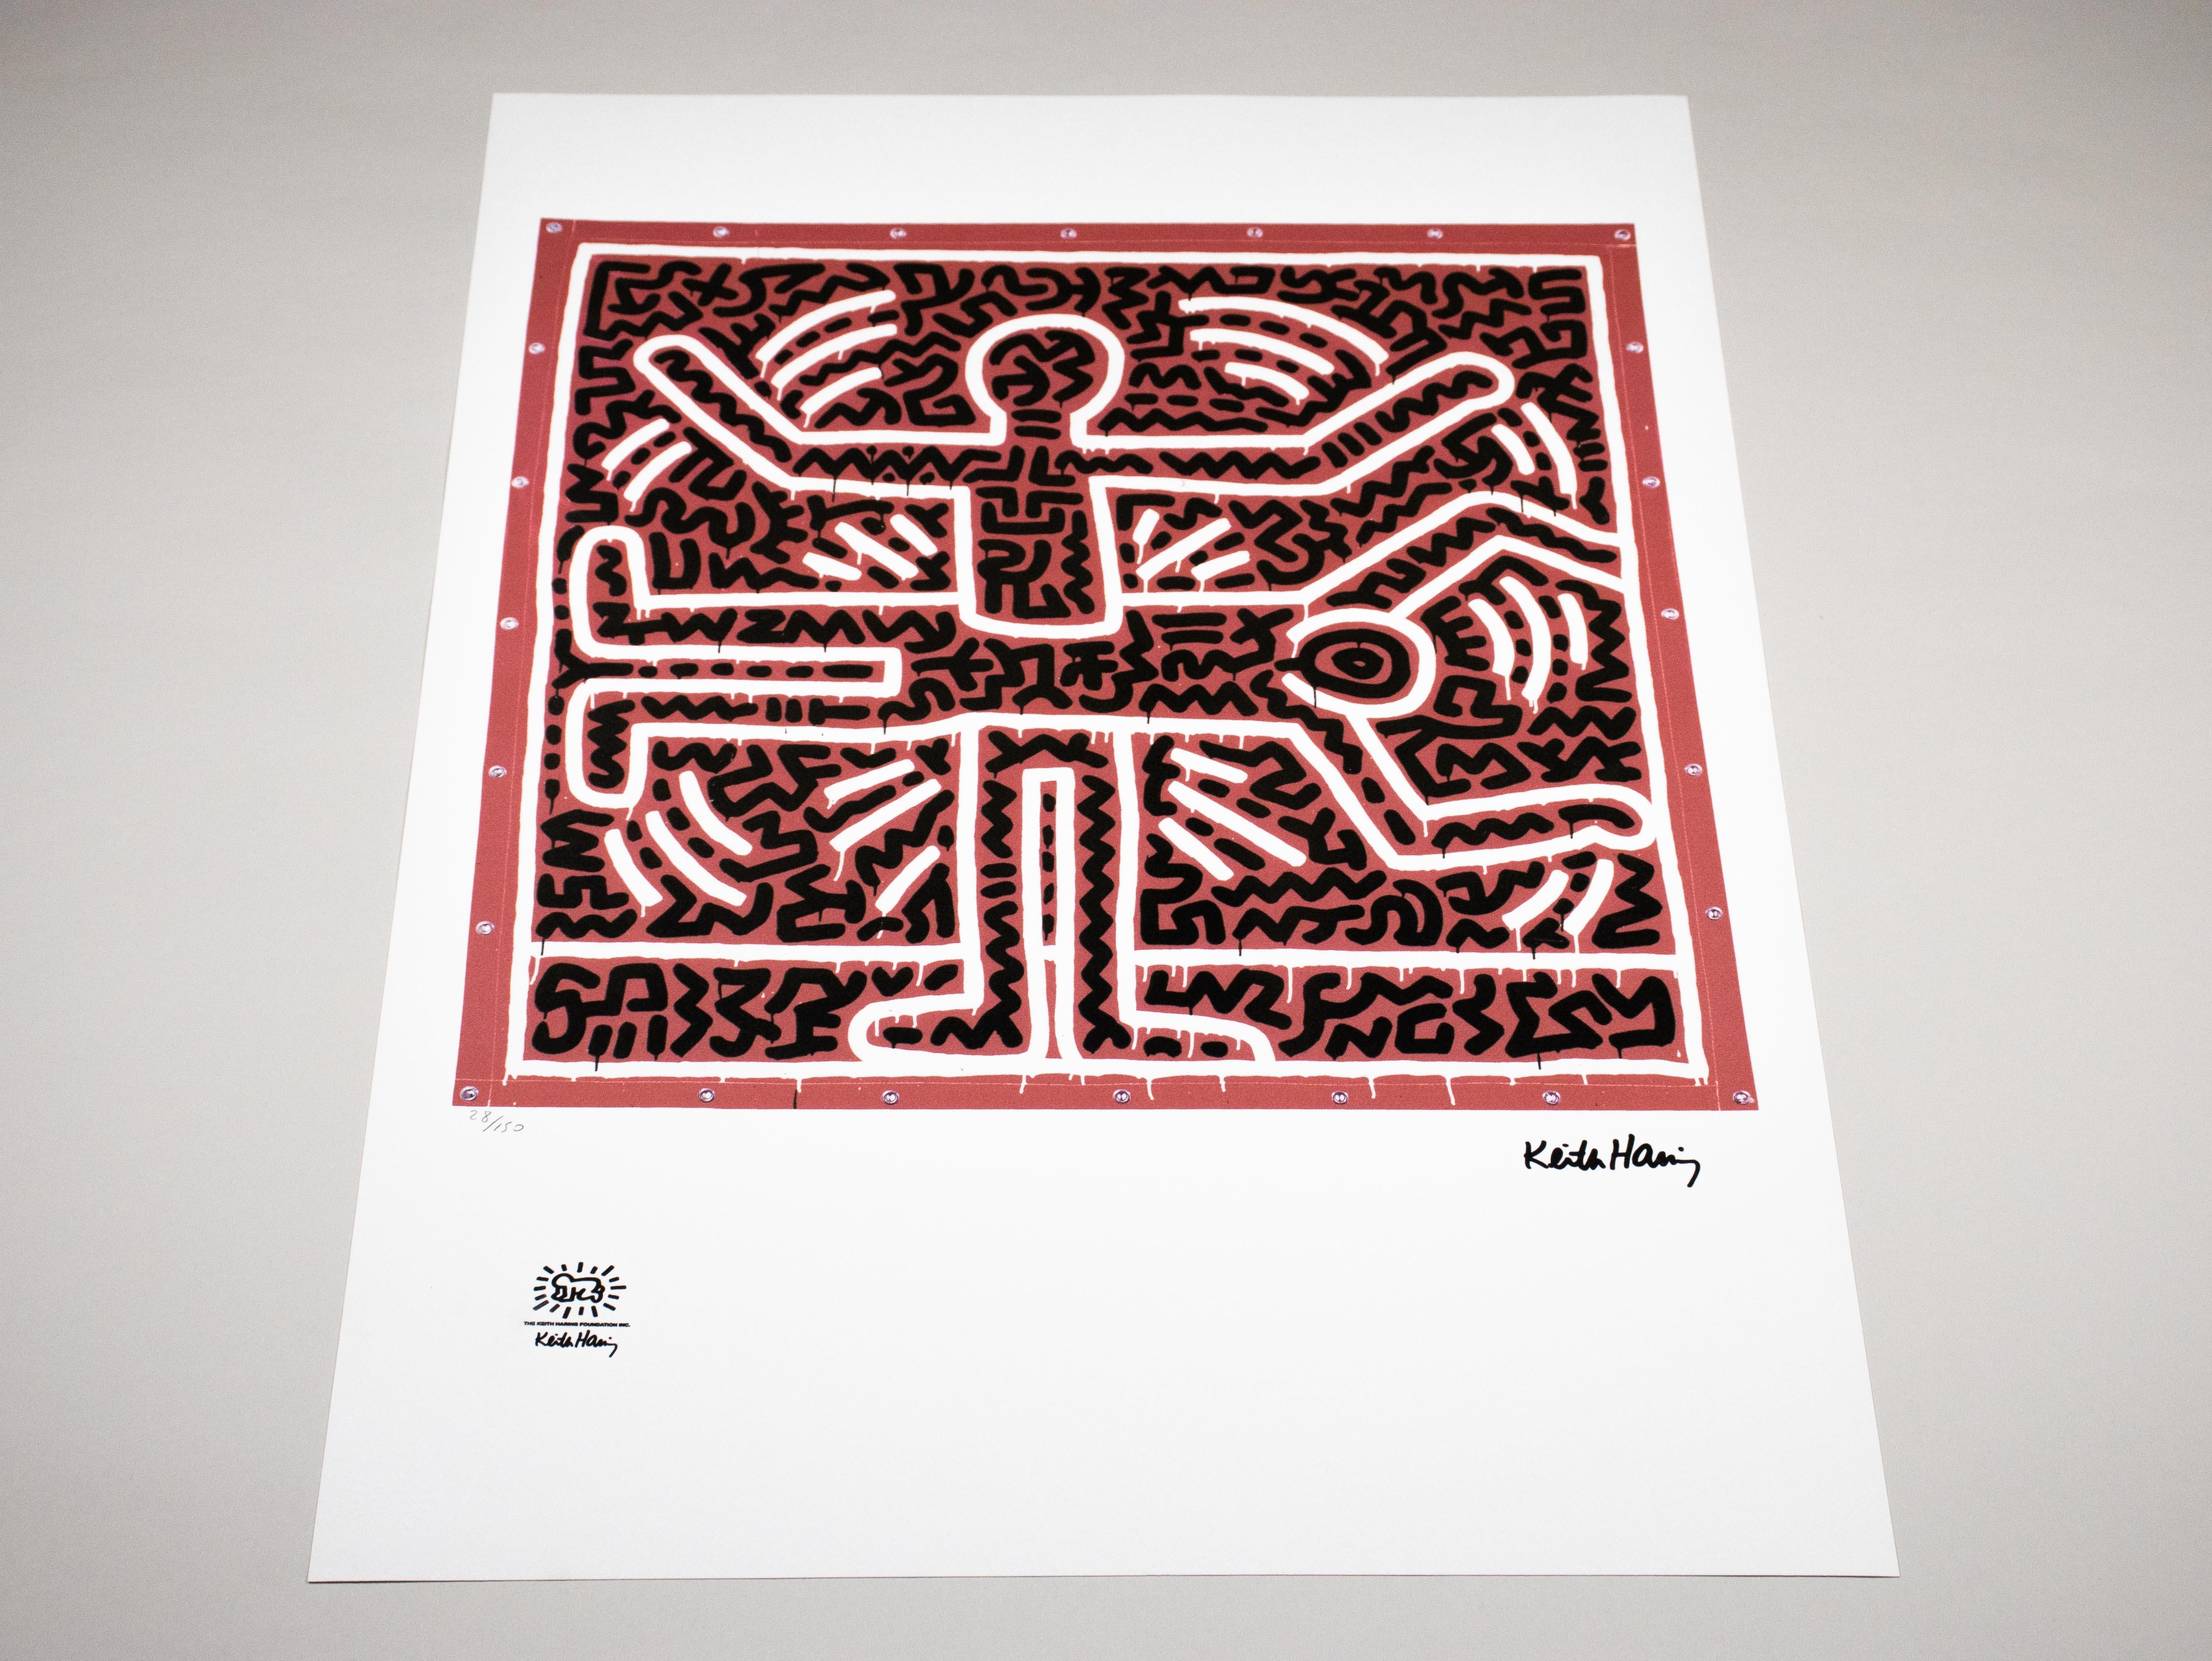 Lithograph - Limited Edition 28/150 - Keith Haring Foundation Inc. For Sale 5